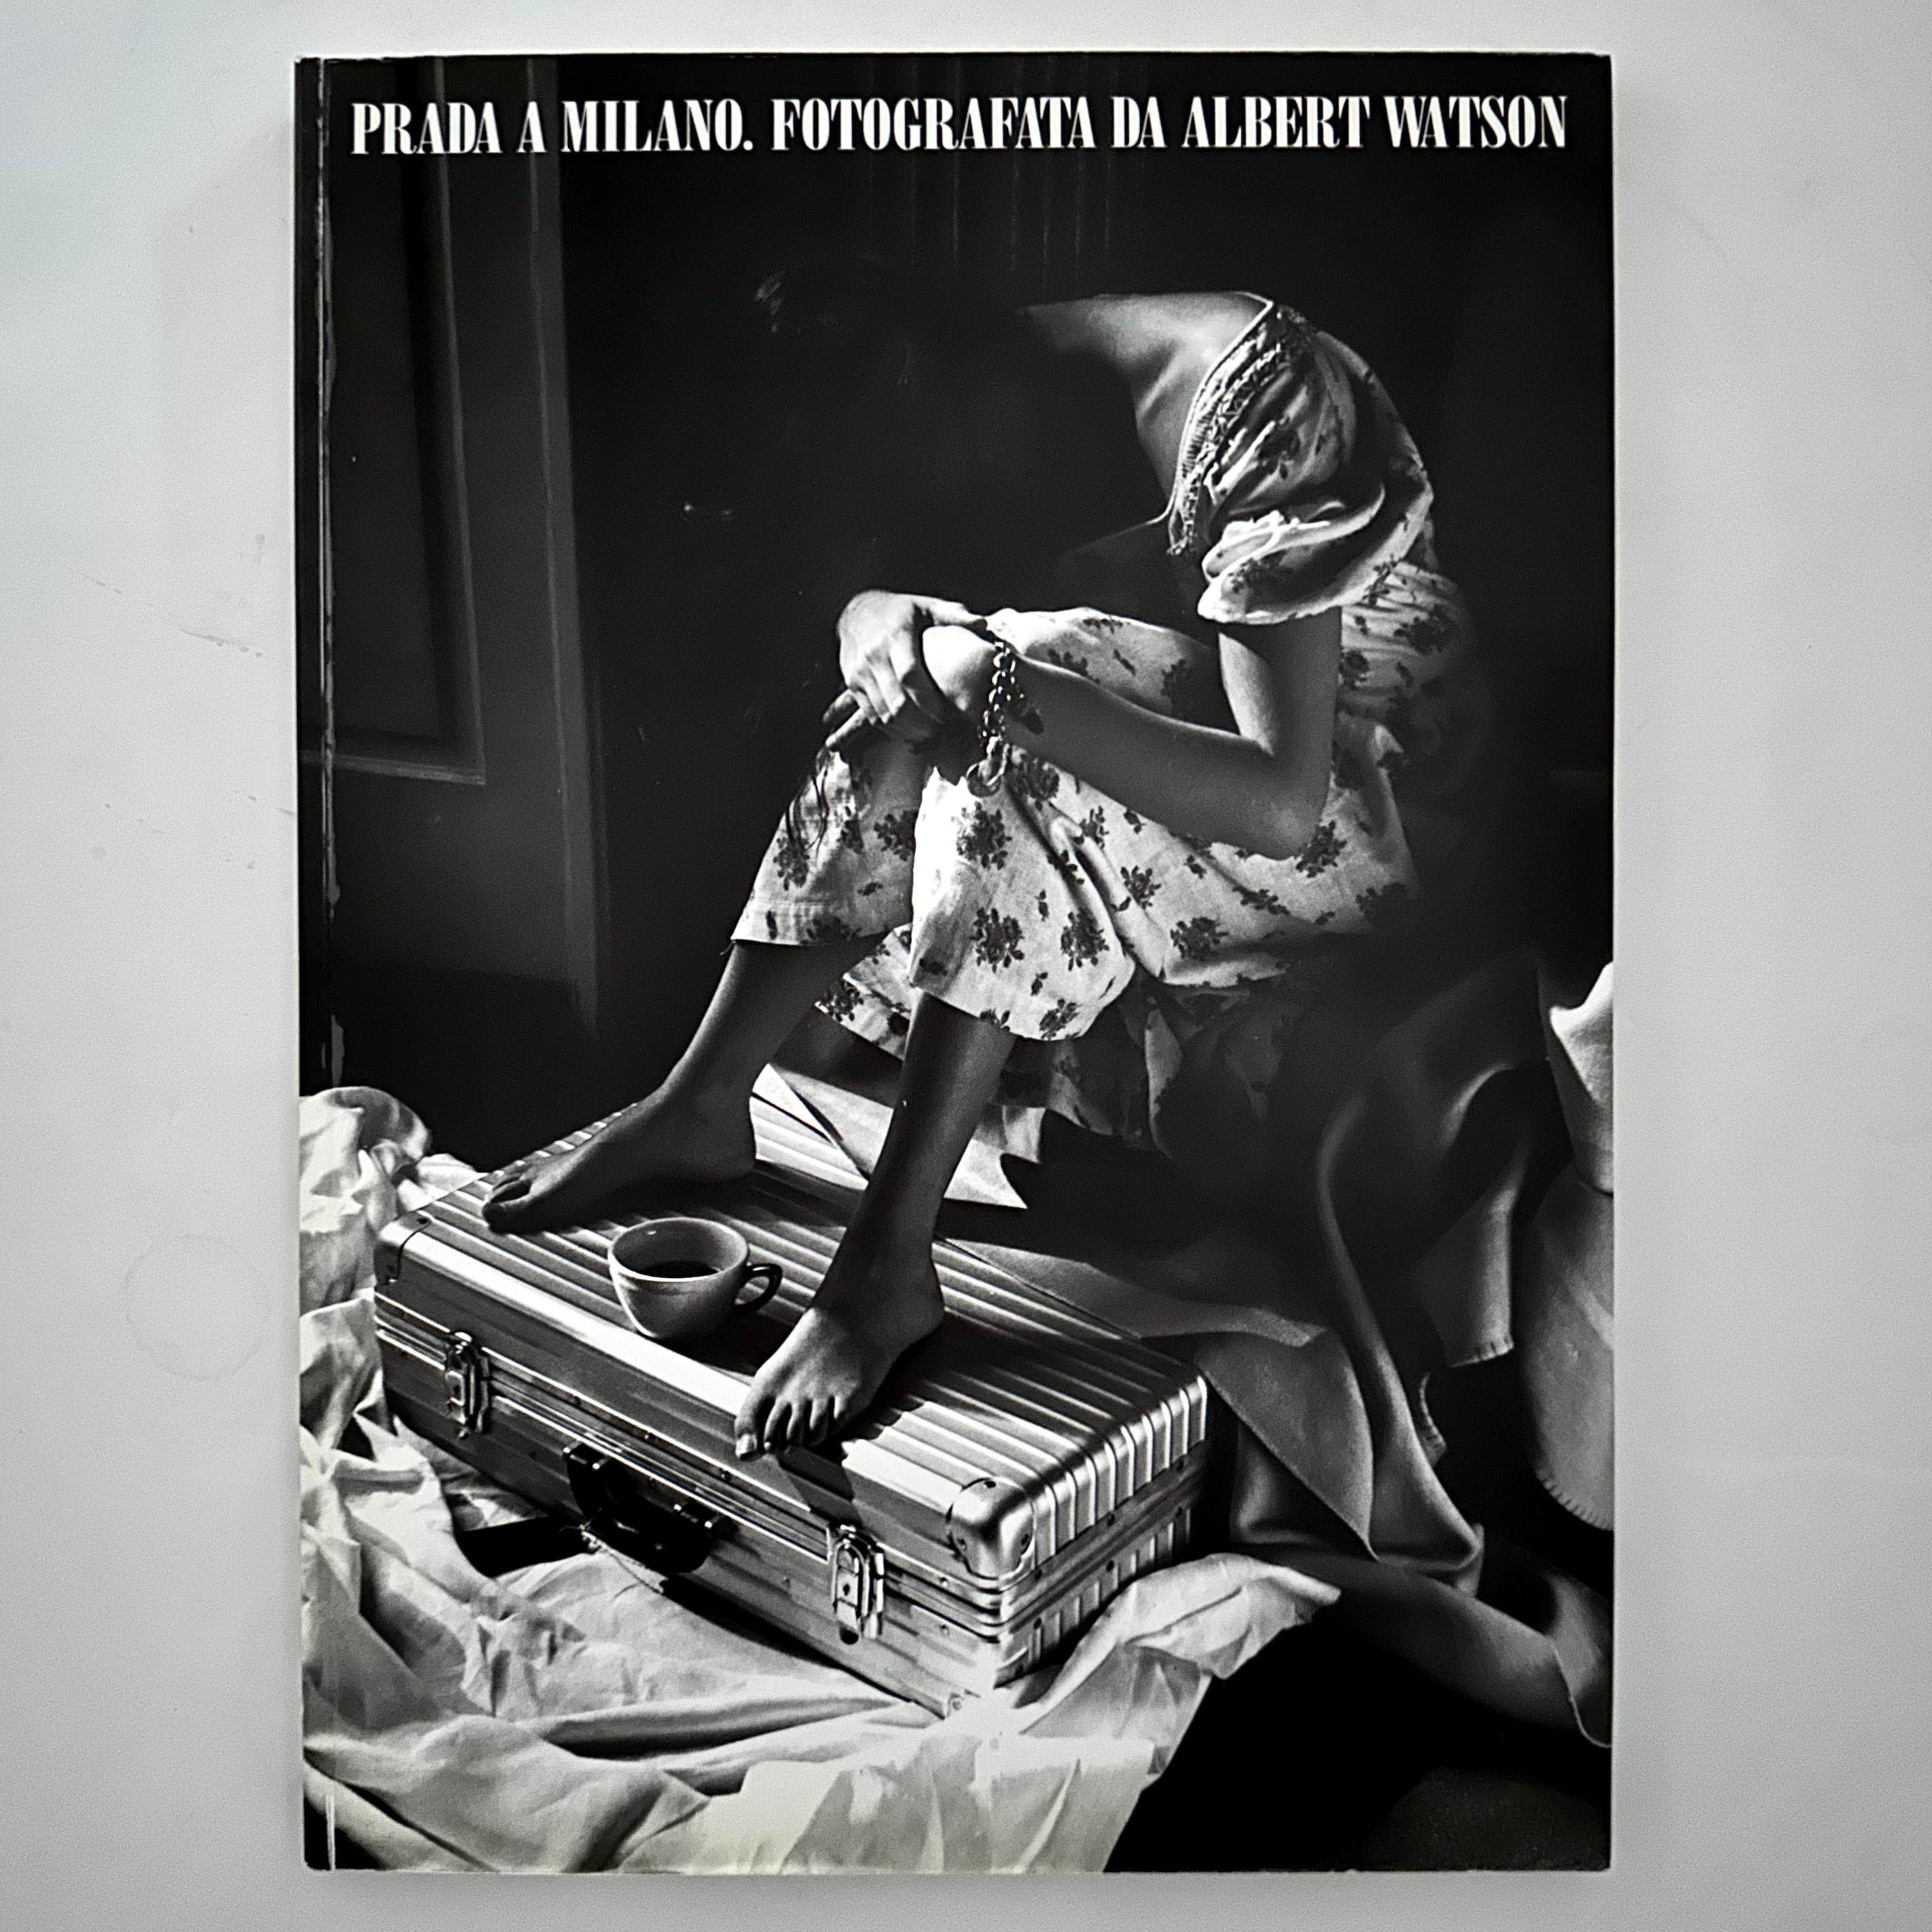 Published by Idea Milan 1988. Softback in printed slipcase. Italian and English text

In 1988 Prada commissioned Albert Watson to create a book interpreting the past and present. Watson uses the original black and white marble chequered floor from